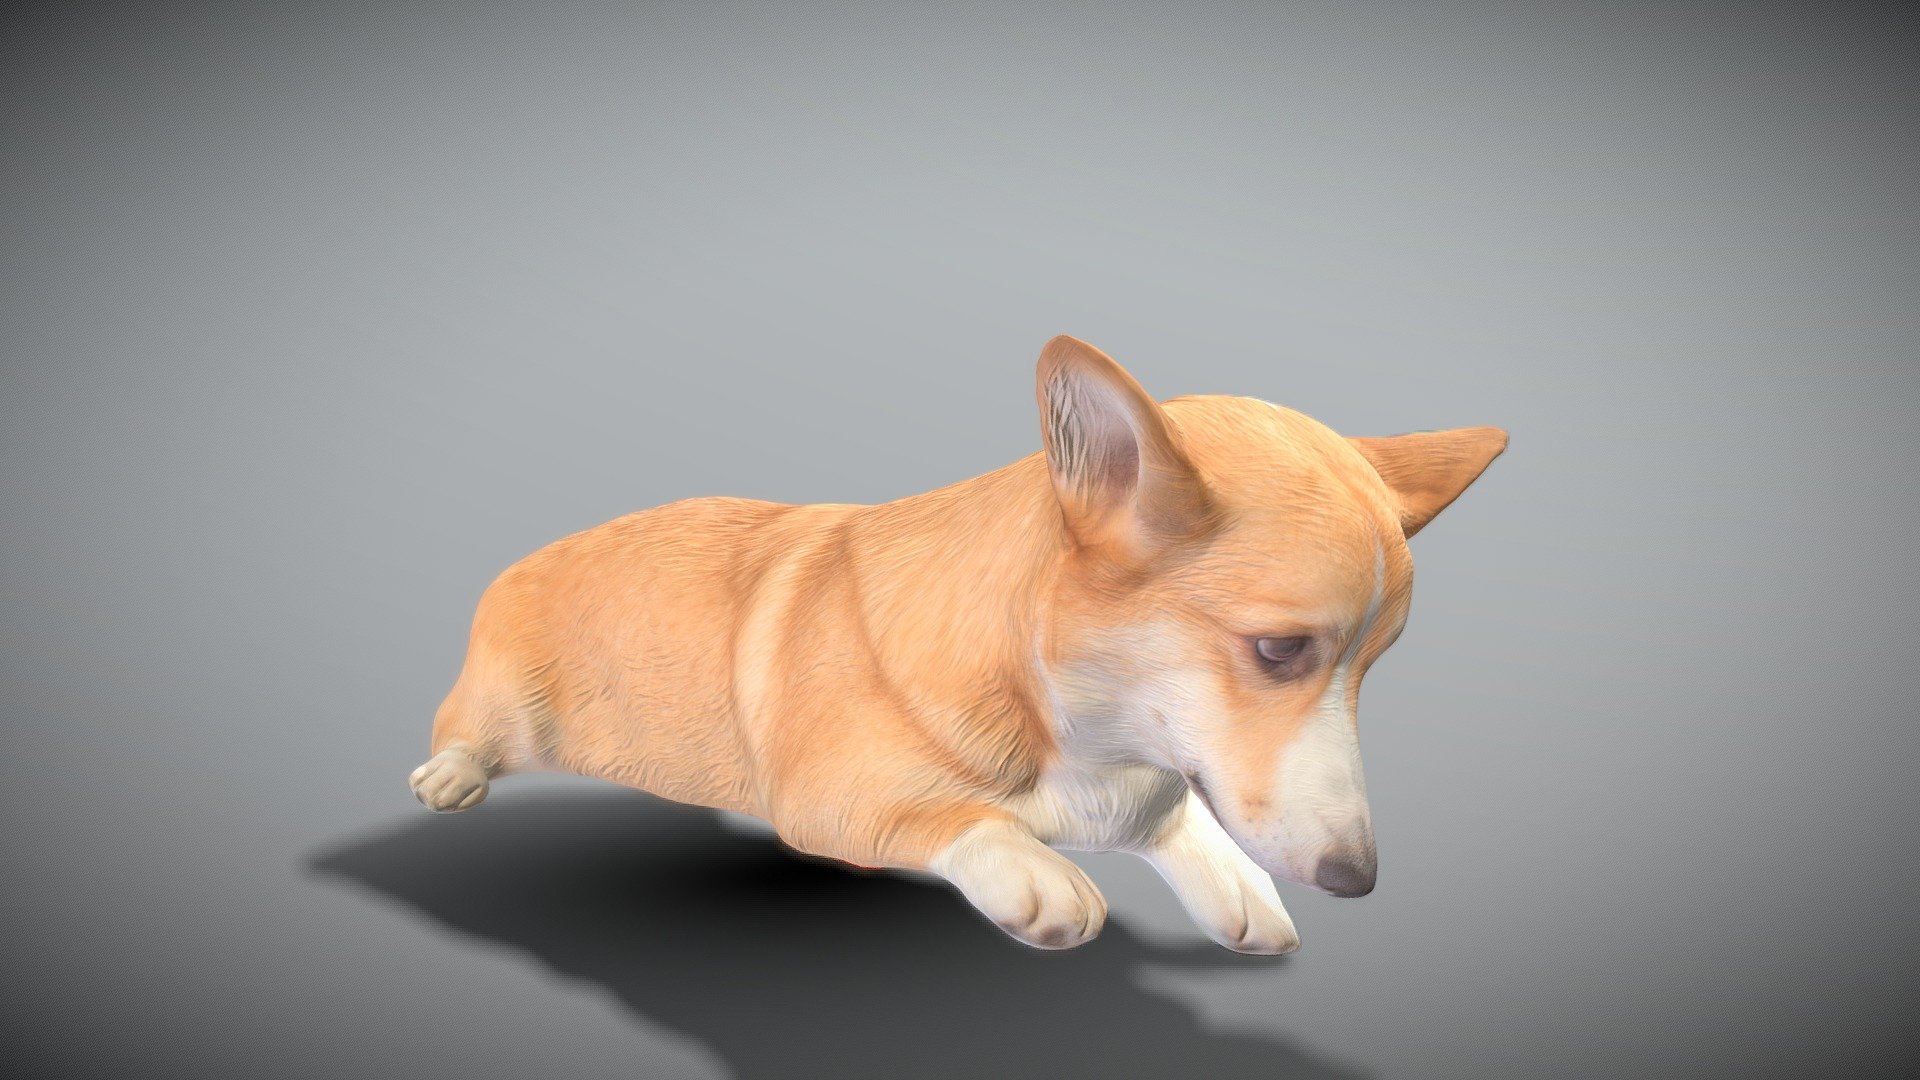 This is a true sized and highly detailed model of a young charming Corgi dog. It will add life and coziness to any architectural visualisation of houses, playgrounds, parques, urban landscapes, etc. This model is suitable for game engine integration, VR/AR content, etc.

Technical specifications:




digital double 3d scan model

100k &amp; 30k triangles | double triangulated

high-poly model (.ztl tool with 5 subdivisions) clean and retopologized automatically via ZRemesher

sufficiently clean

PBR textures 8K resolution: Diffuse, Normal, Specular maps

non-overlapping UV map

no extra plugins are required for this model

Download package includes a Cinema 4D project file with Redshift shader, OBJ, FBX, STL files, which are applicable for 3ds Max, Maya, Unreal Engine, Unity, Blender, etc. All the textures you will find in the “Tex” folder, included into the main archive.

3D EVERYTHING

Stand with Ukraine! - Welsh corgi 44 - Buy Royalty Free 3D model by deep3dstudio 3d model